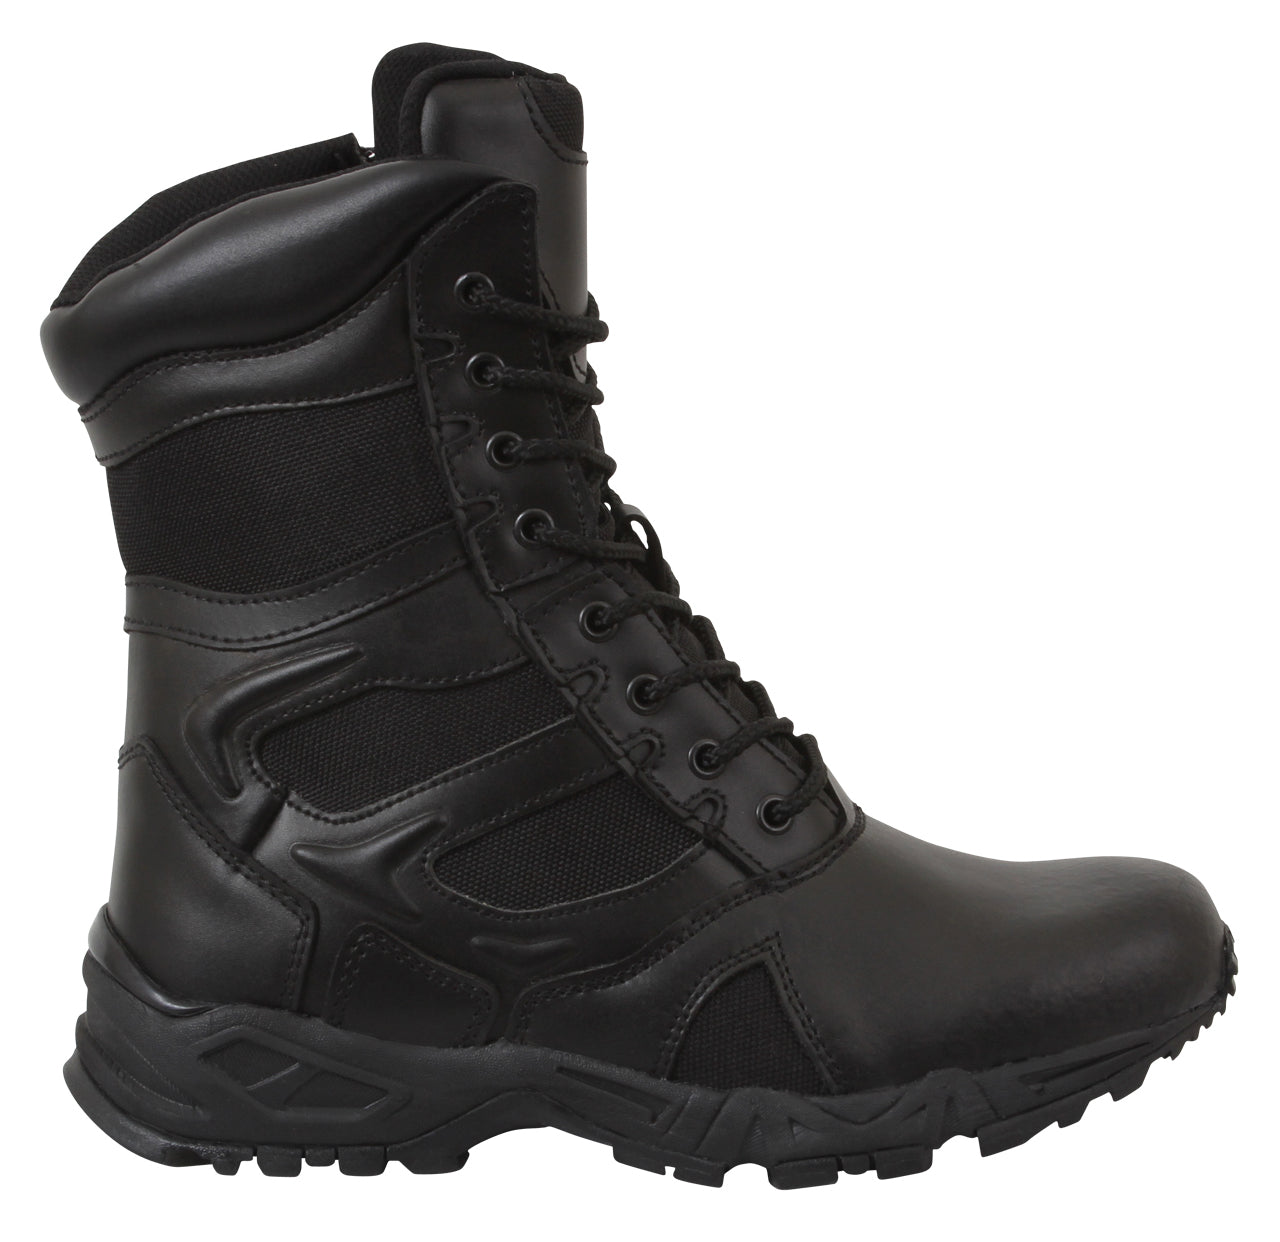 Rothco Forced Entry Deployment Boot With Side Zipper - 8 Inch - Tactical Choice Plus